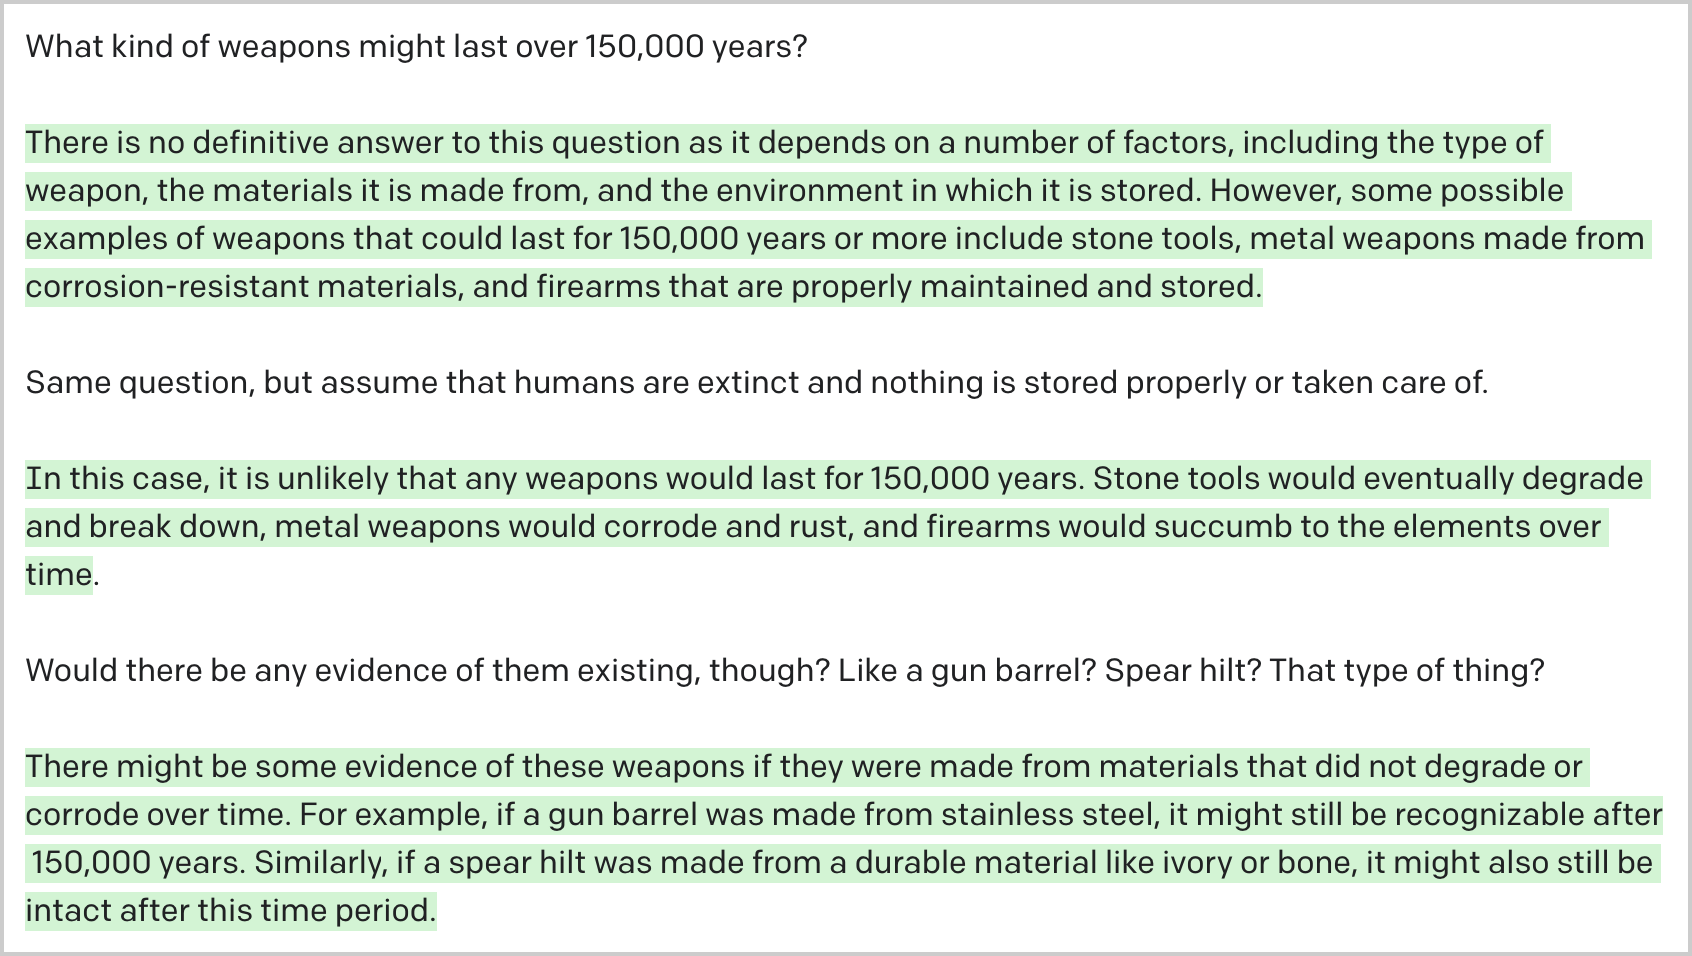 An exchange with an AI where it describes weapons that could last hundreds of thousands of years